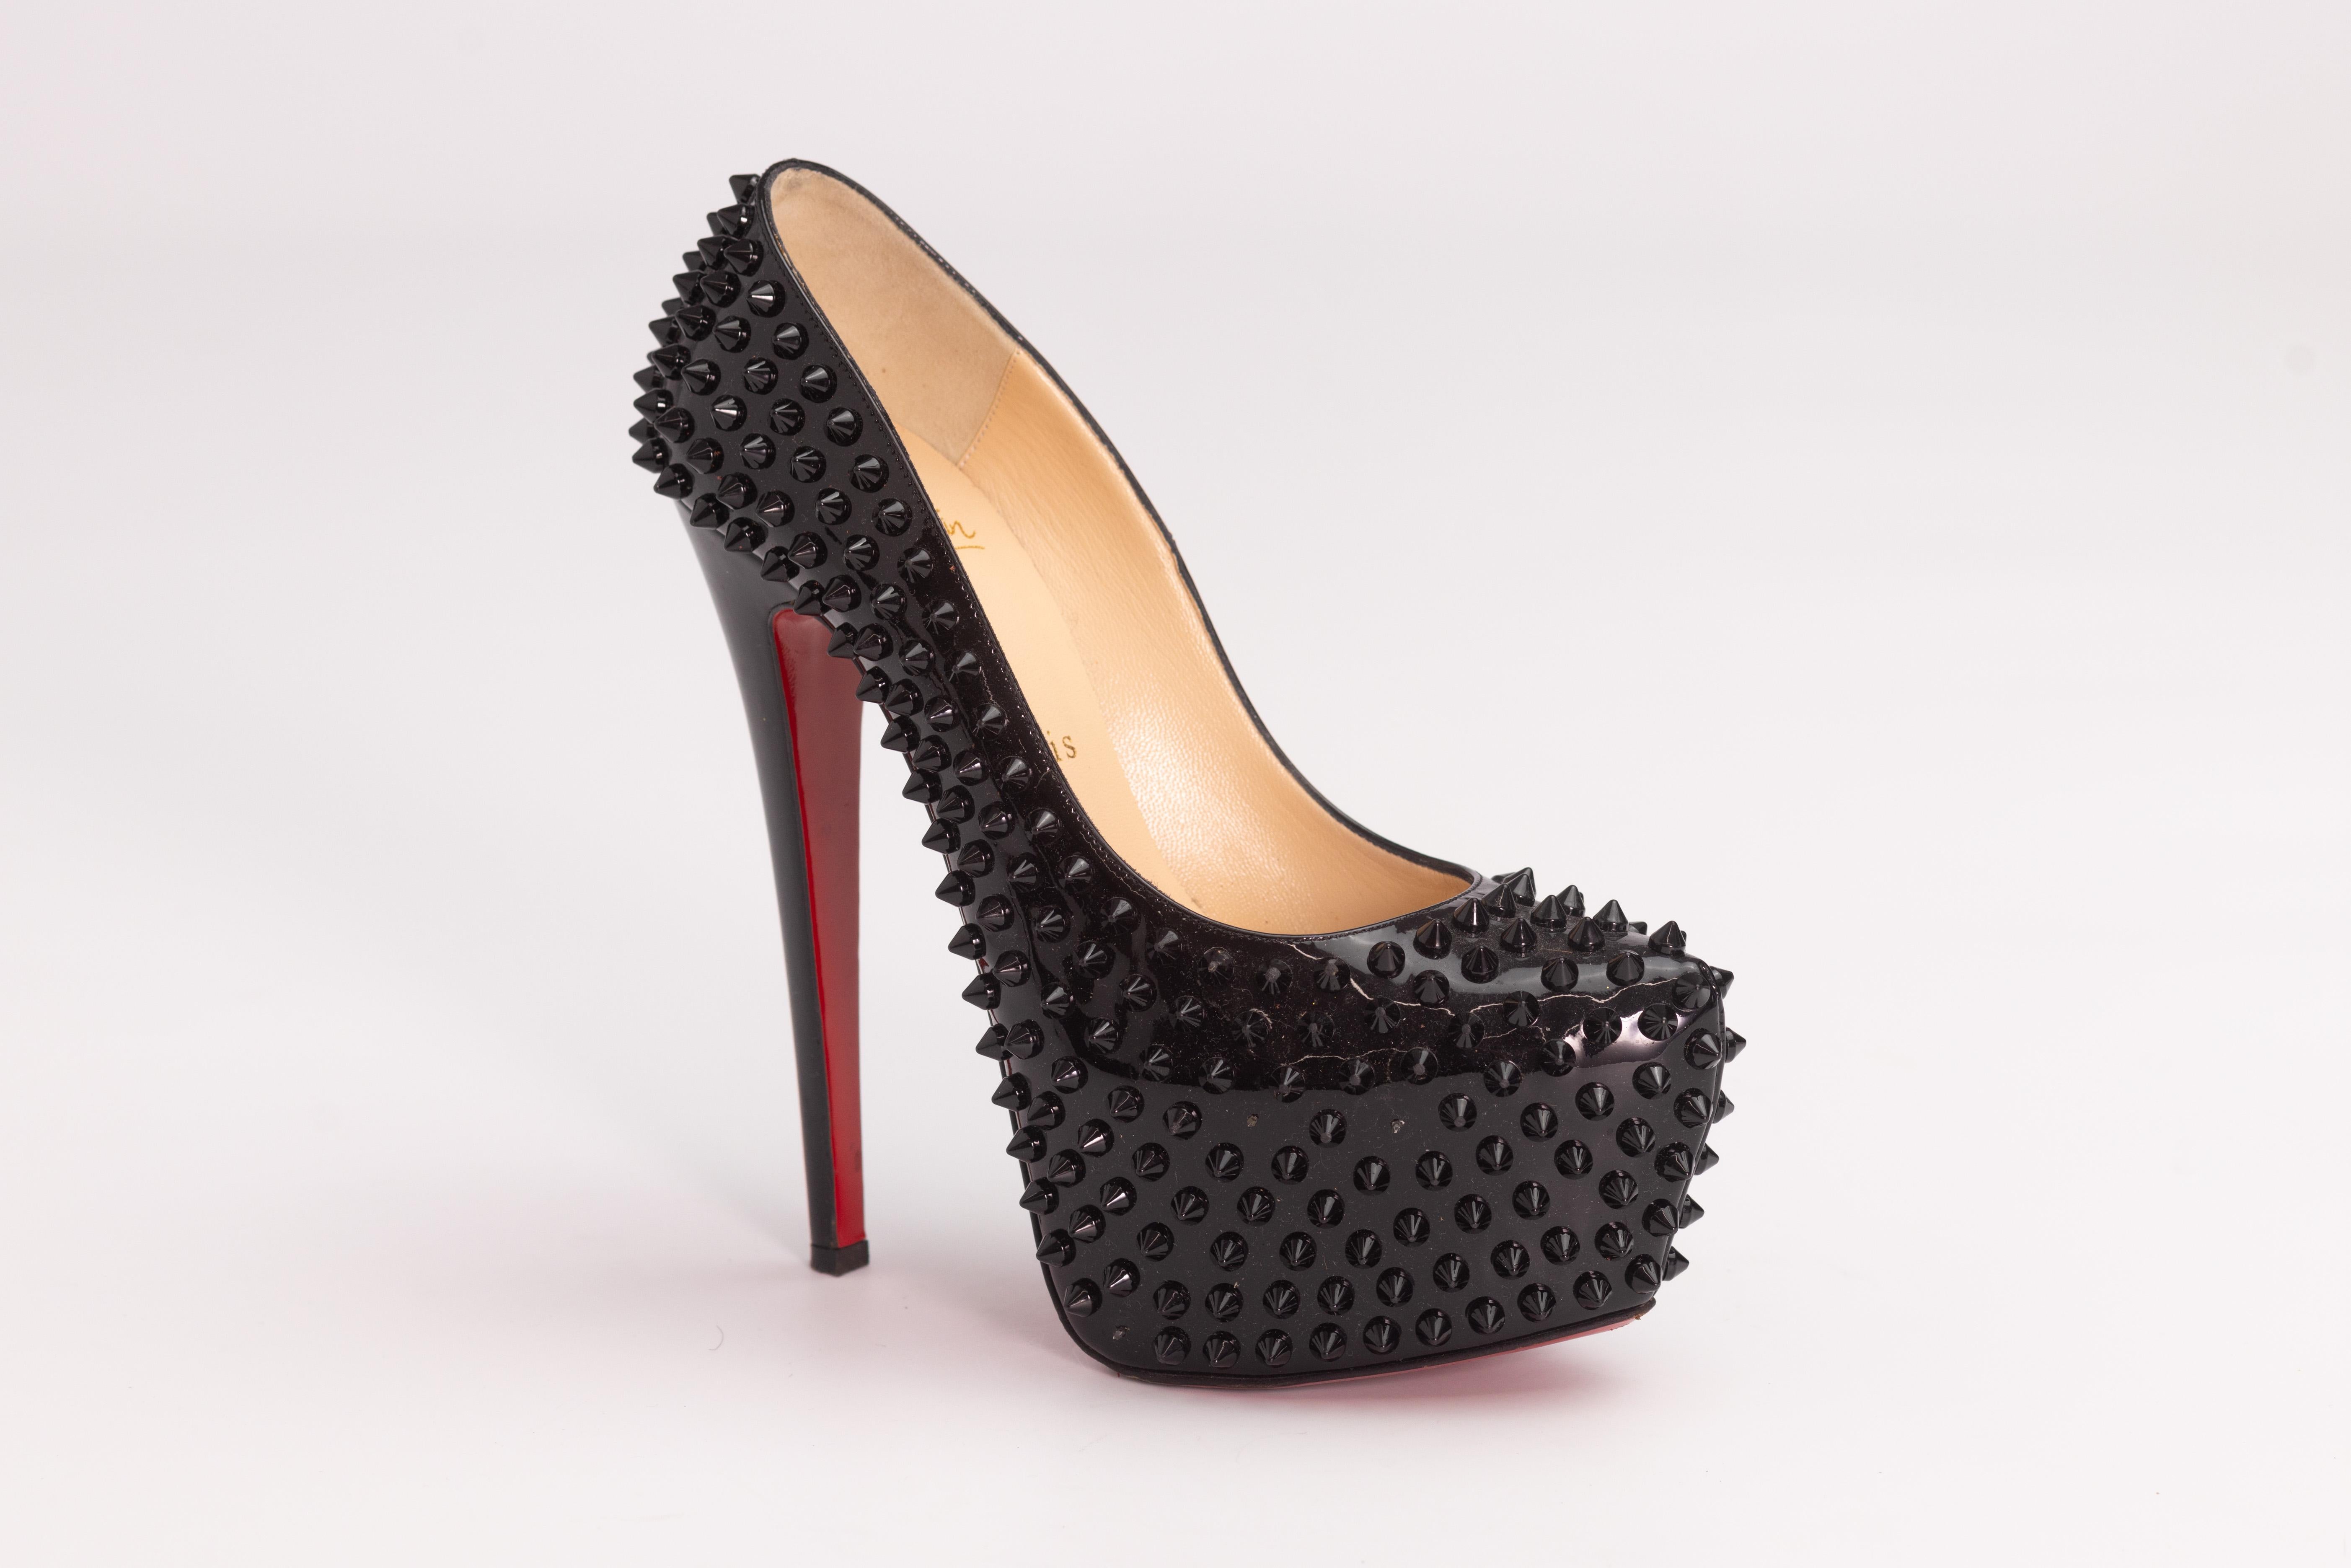 CHRISTIAN LOUBOUTIN BLACK SKIKE PLATFORMS DAFFODILE HEELS (EU 37)

These stunning pumps have a soaring 160mm heel and a 60mm front platform. These sky high heels are composed of black leather with black spikes and signature red lacquered